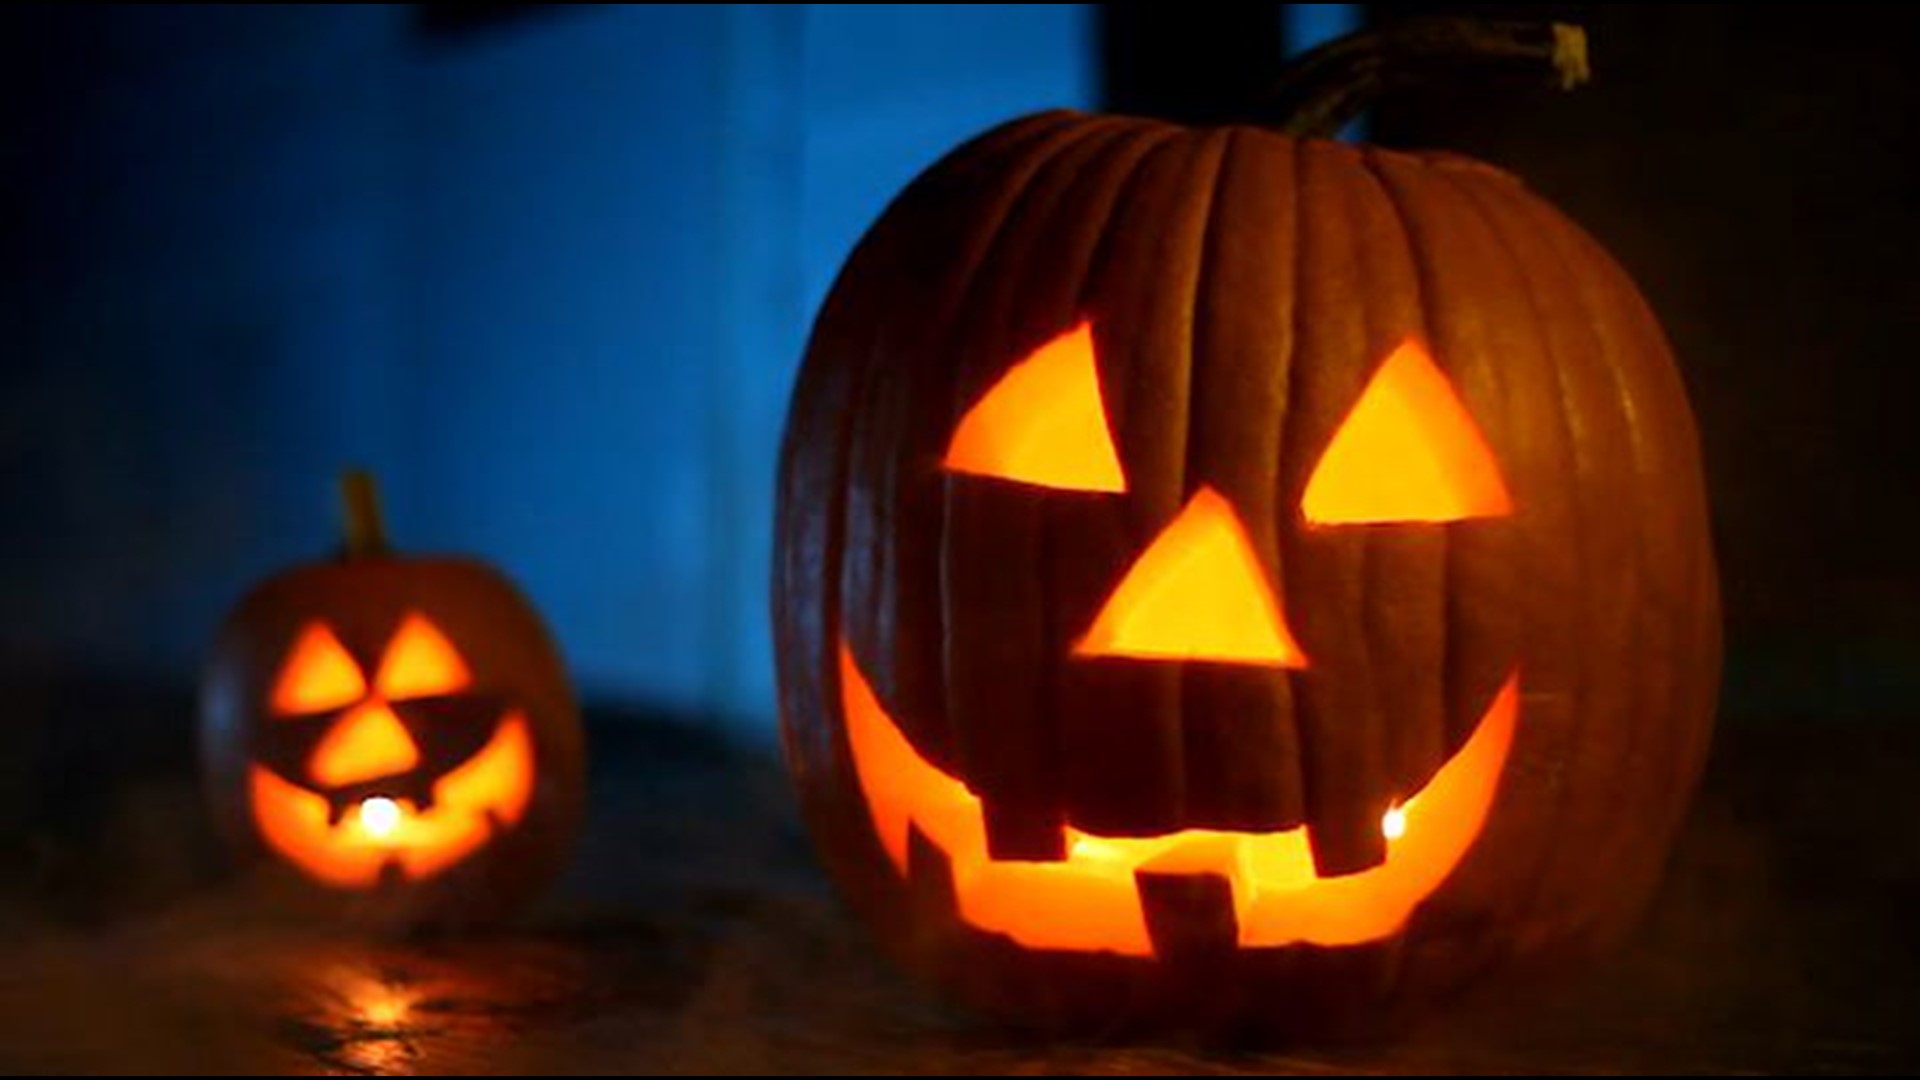 You can expect some differences for Halloween this year due to the ongoing COVID-19 pandemic. The American Red Cross does not recommend trick-or-treating, but instead has some great alternatives for Halloween fun!